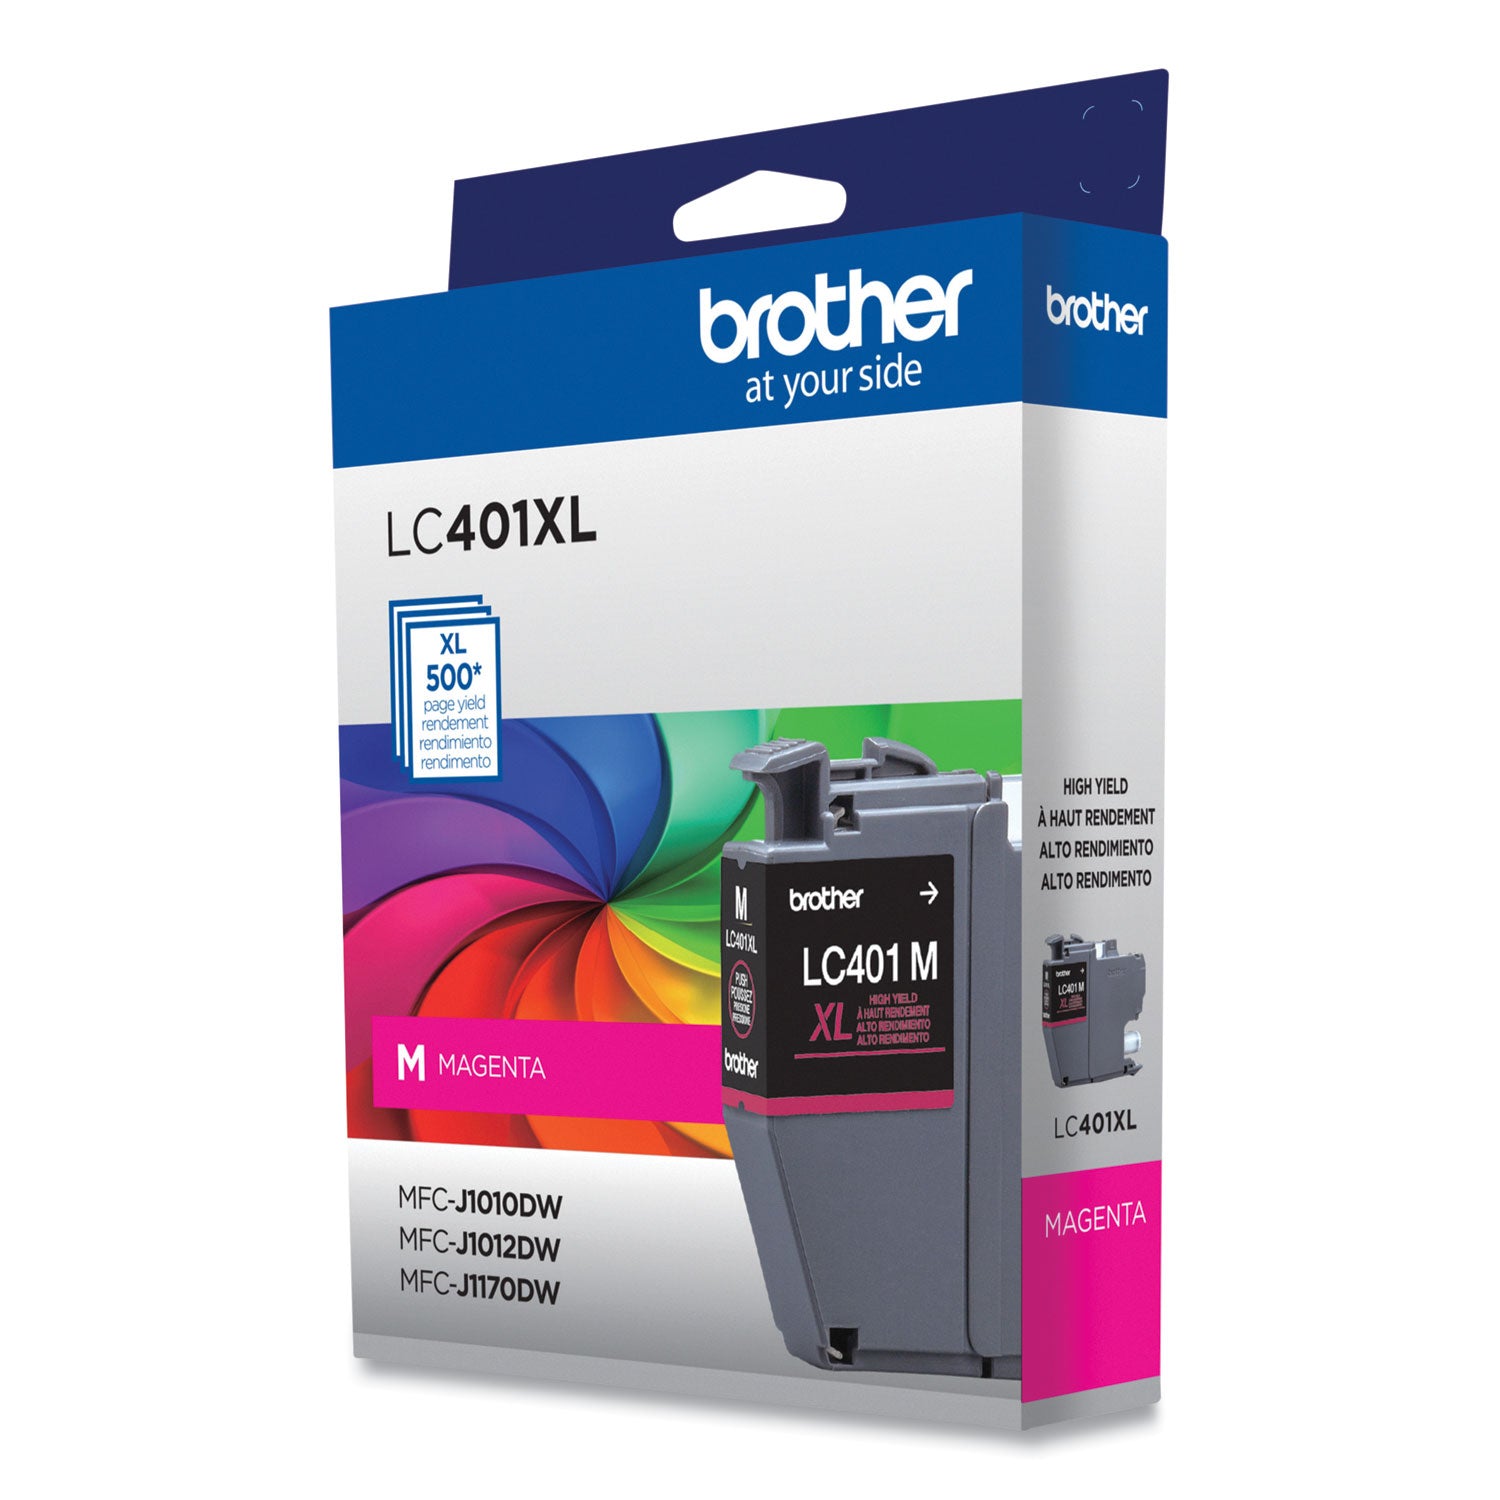 lc401xlms-high-yield-ink-500-page-yield-magenta_brtlc401xlms - 2